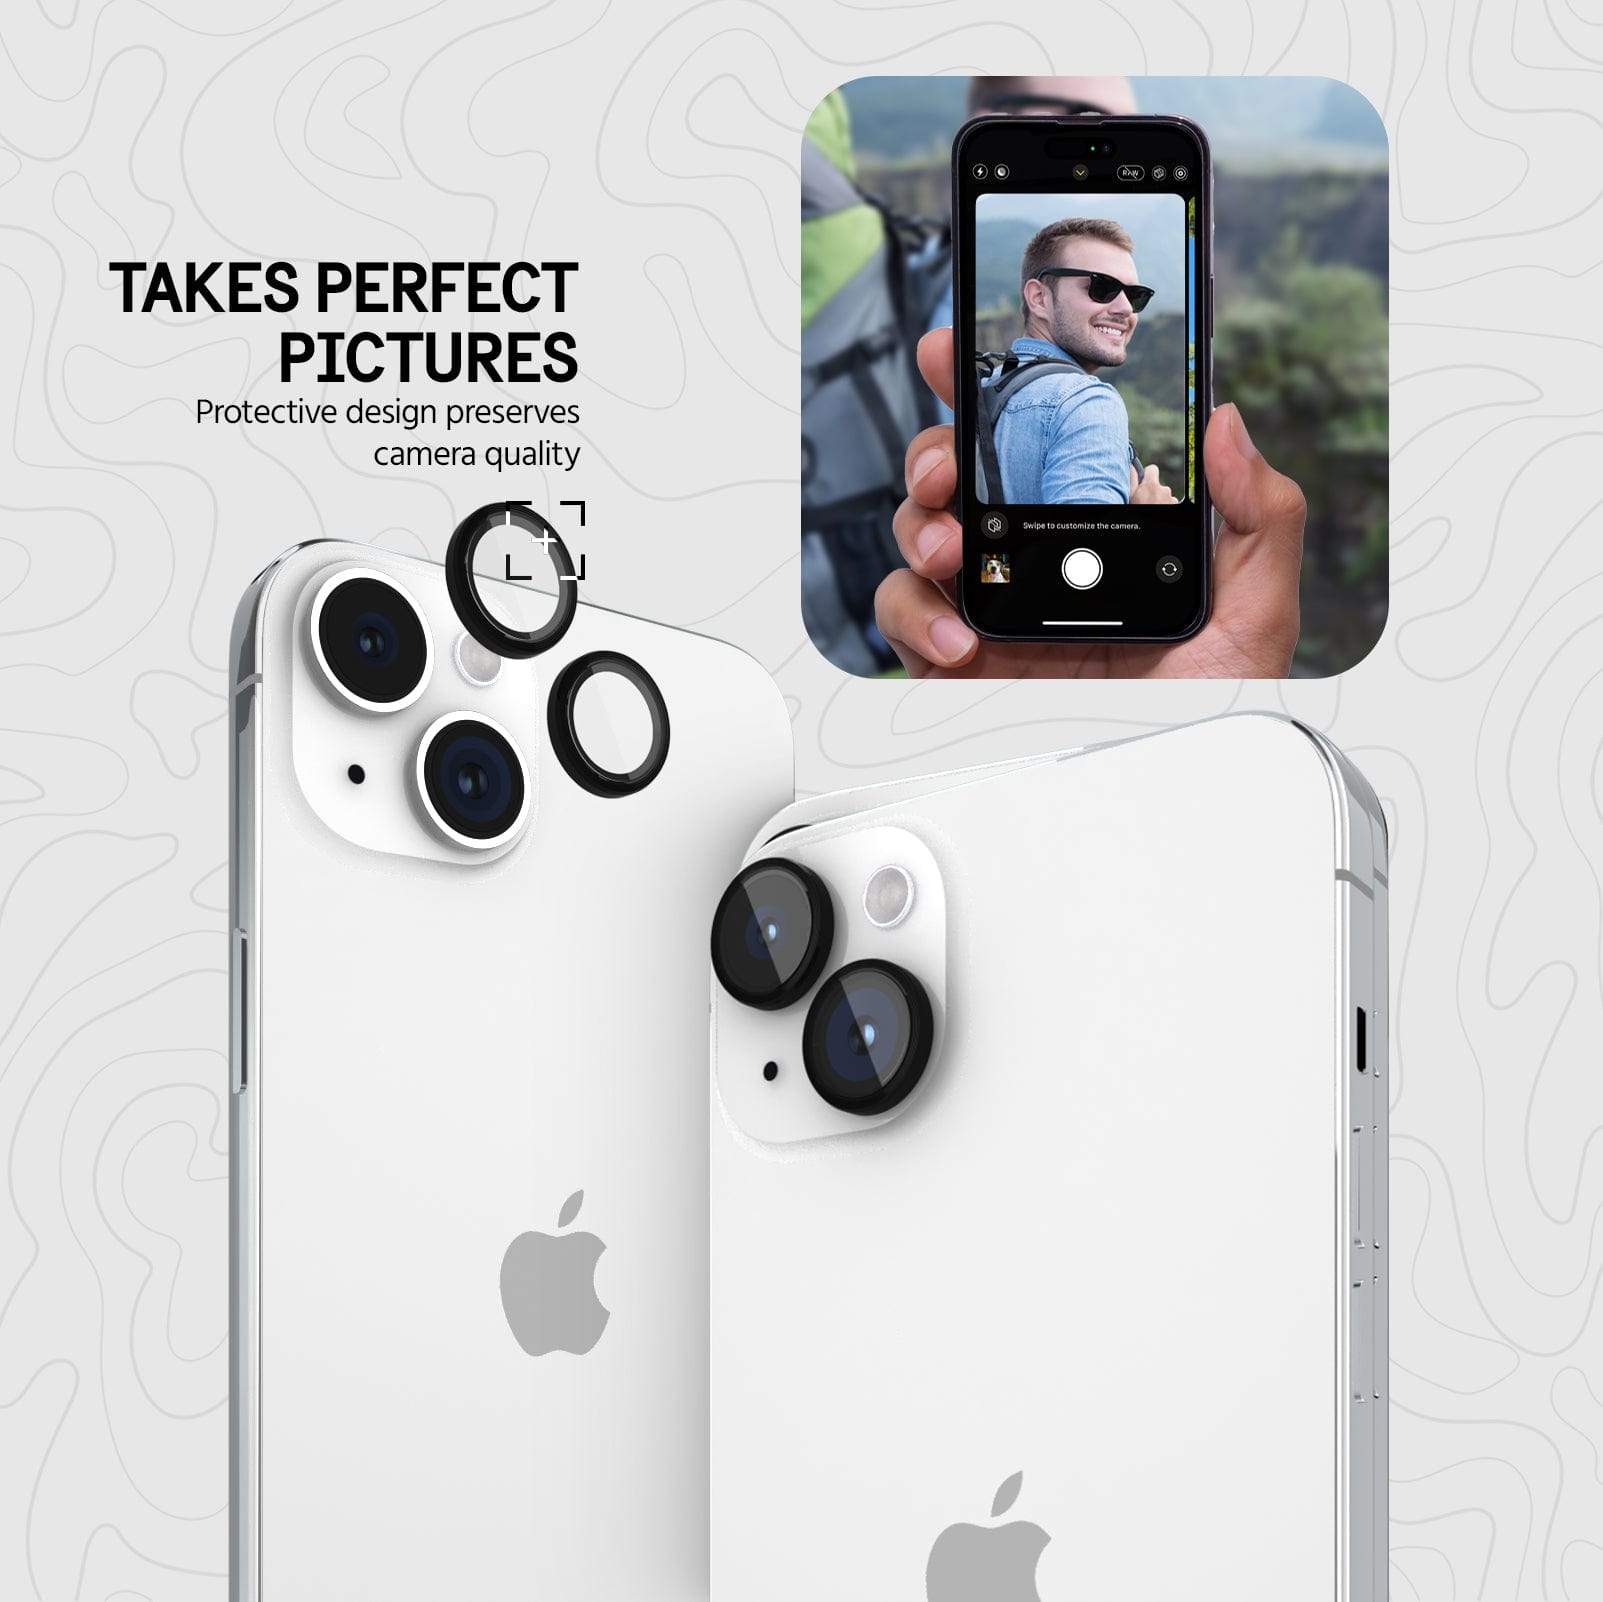 TAKES PERFECT PICTURES. PROTECTIVE DESIGN PRESERVES CAMERA QUALITY